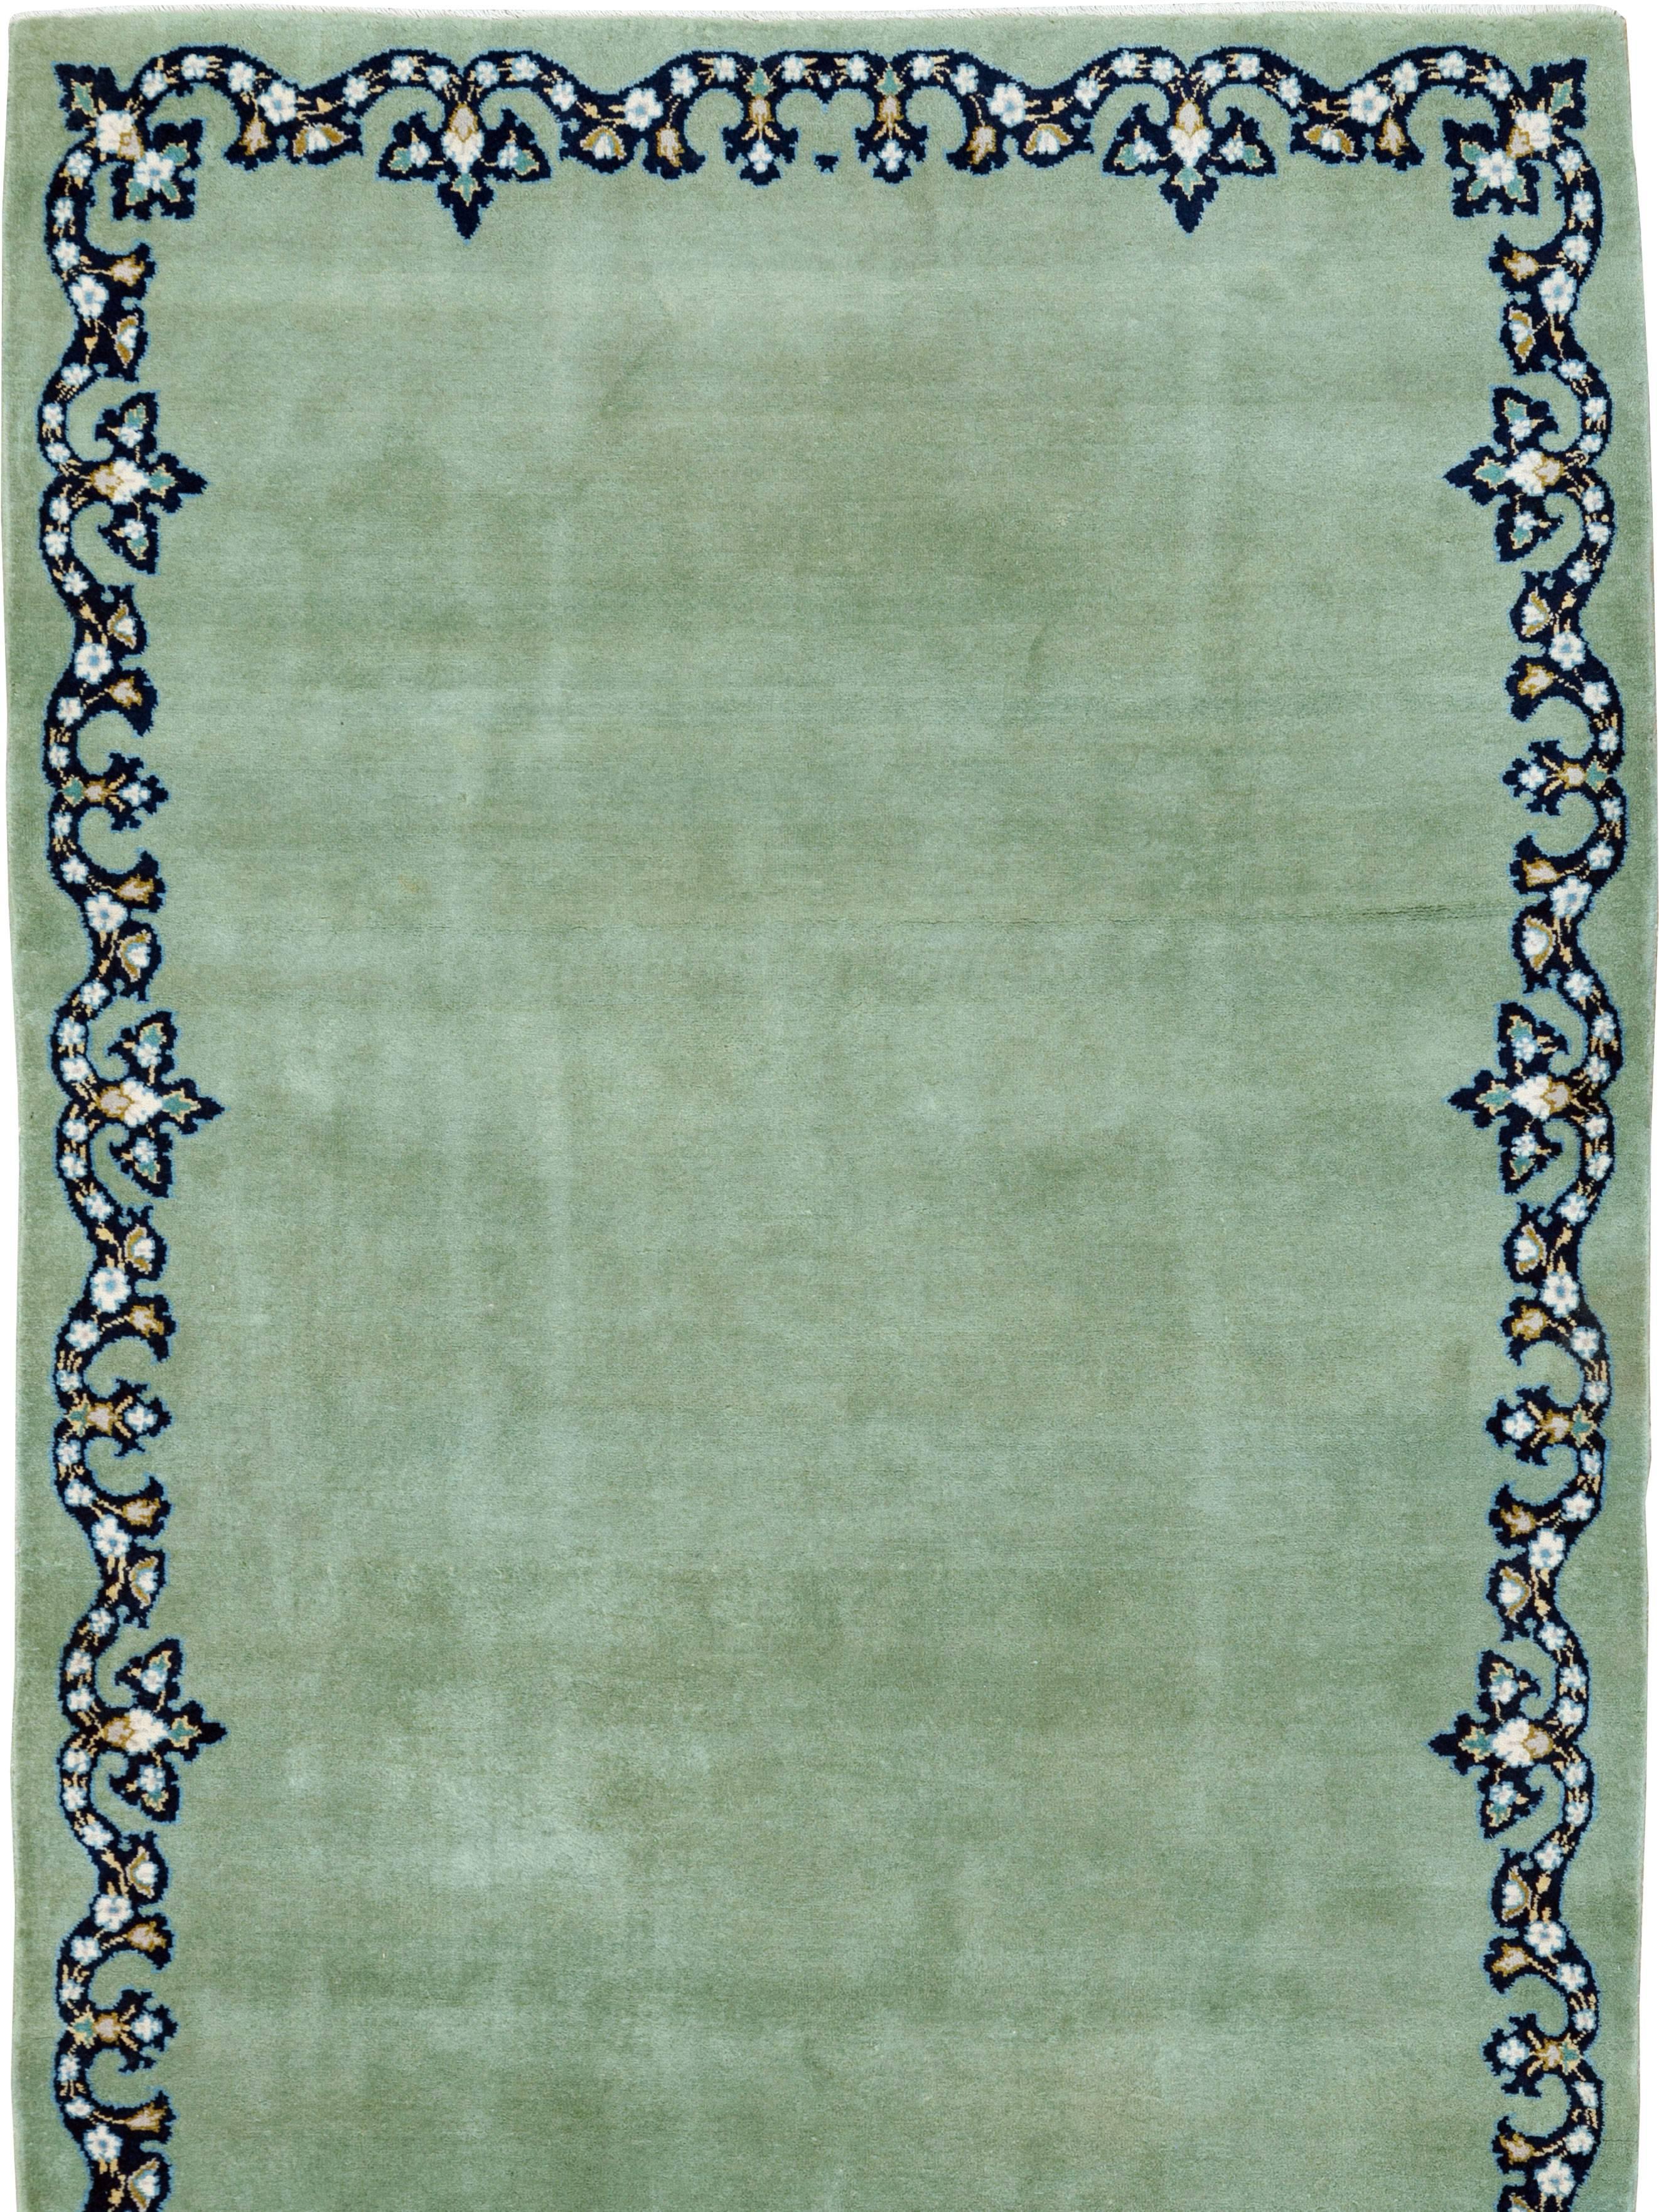 A vintage Persian Kashan runner from the mid-20th century.